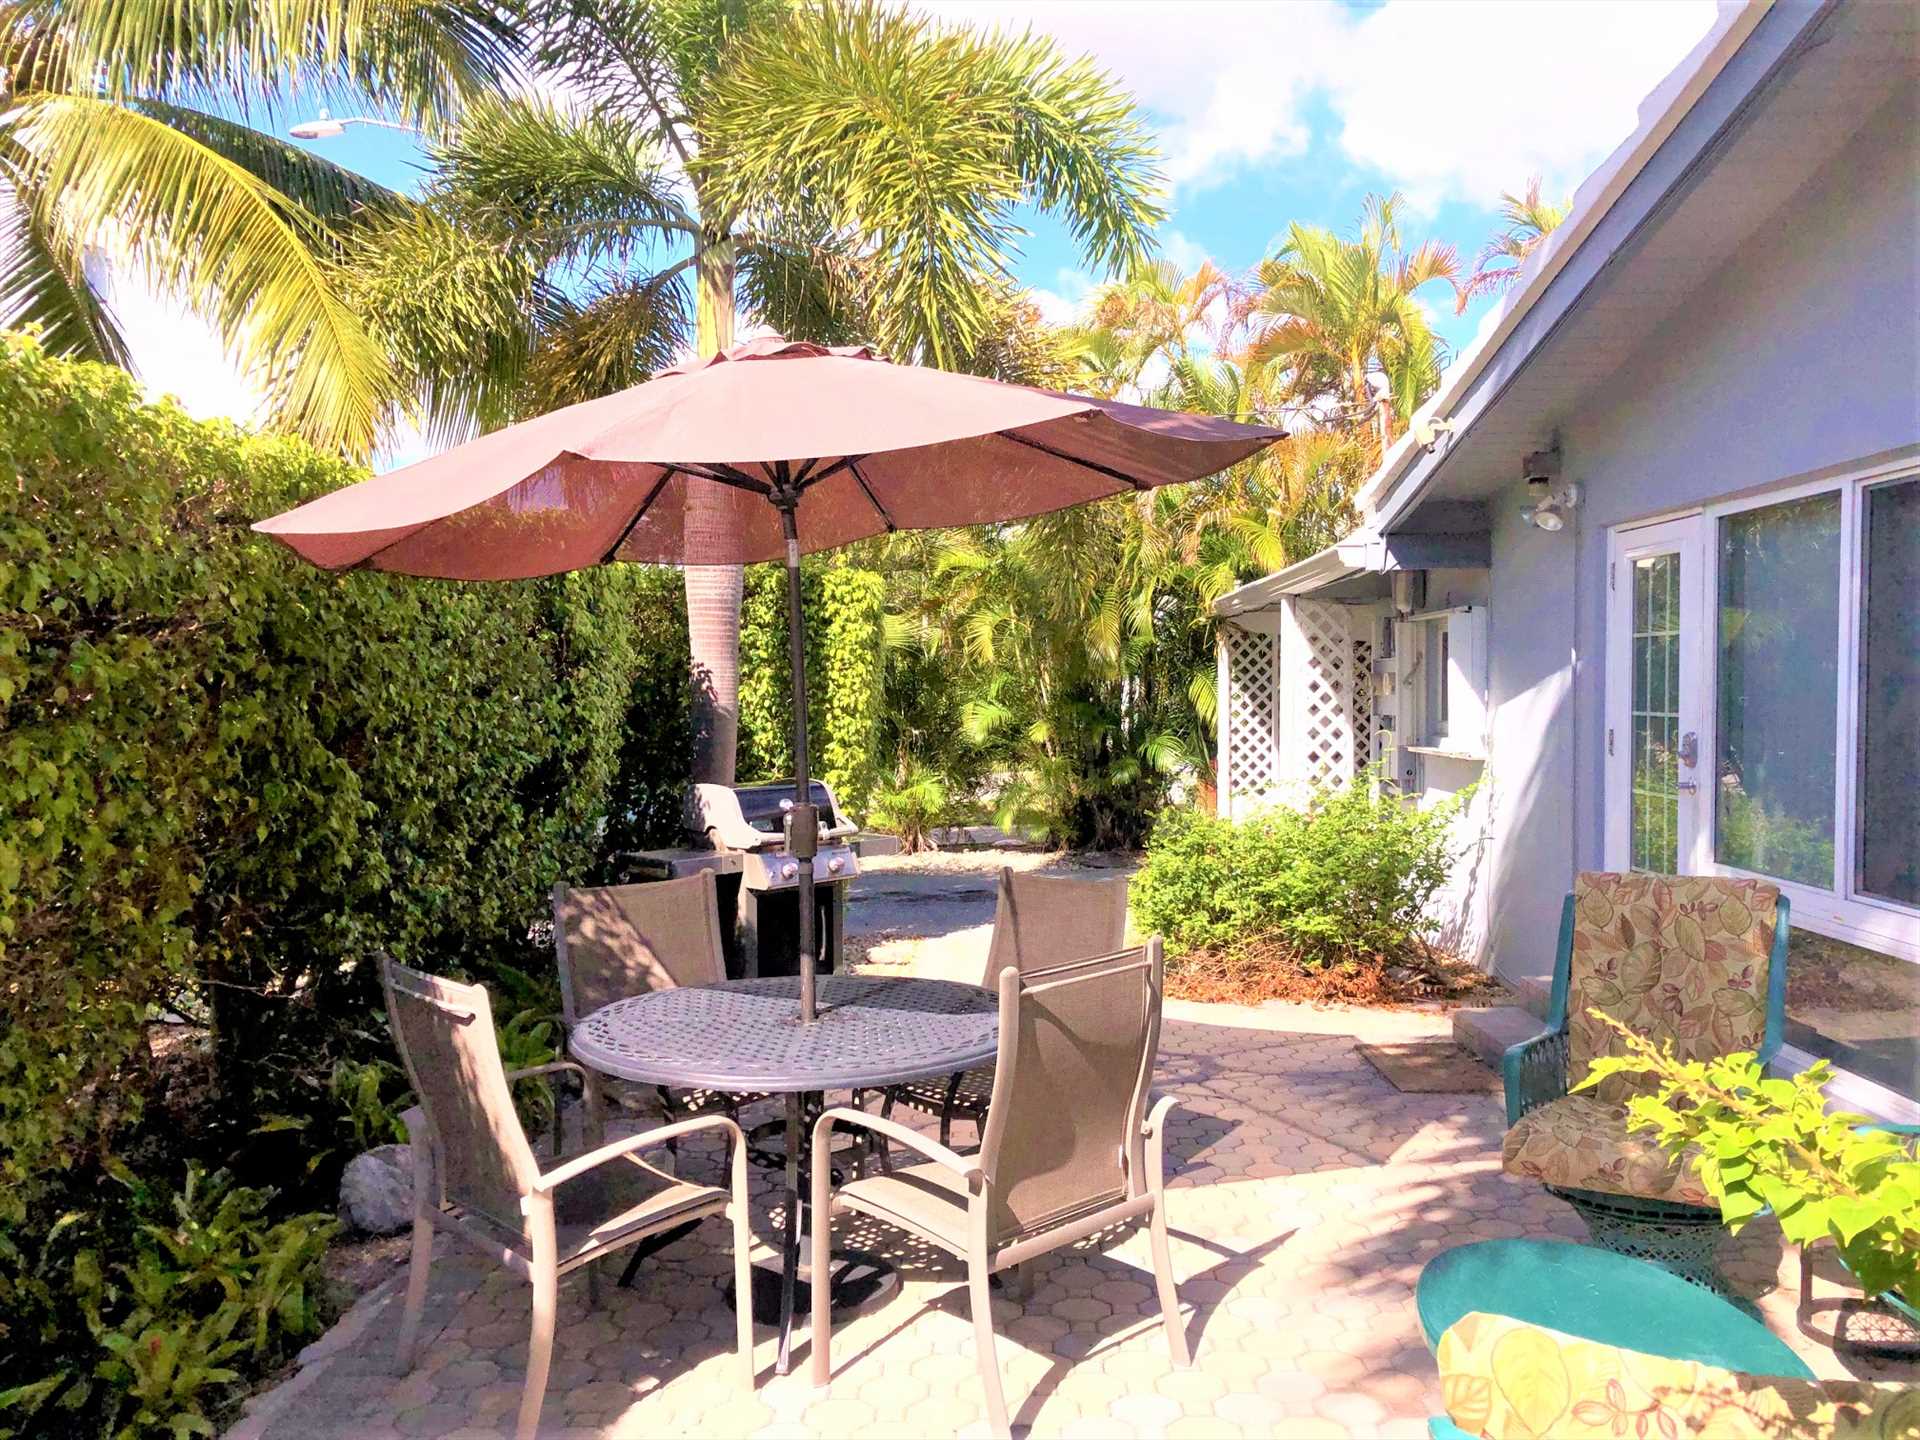 Dine on the patio South Florida style!